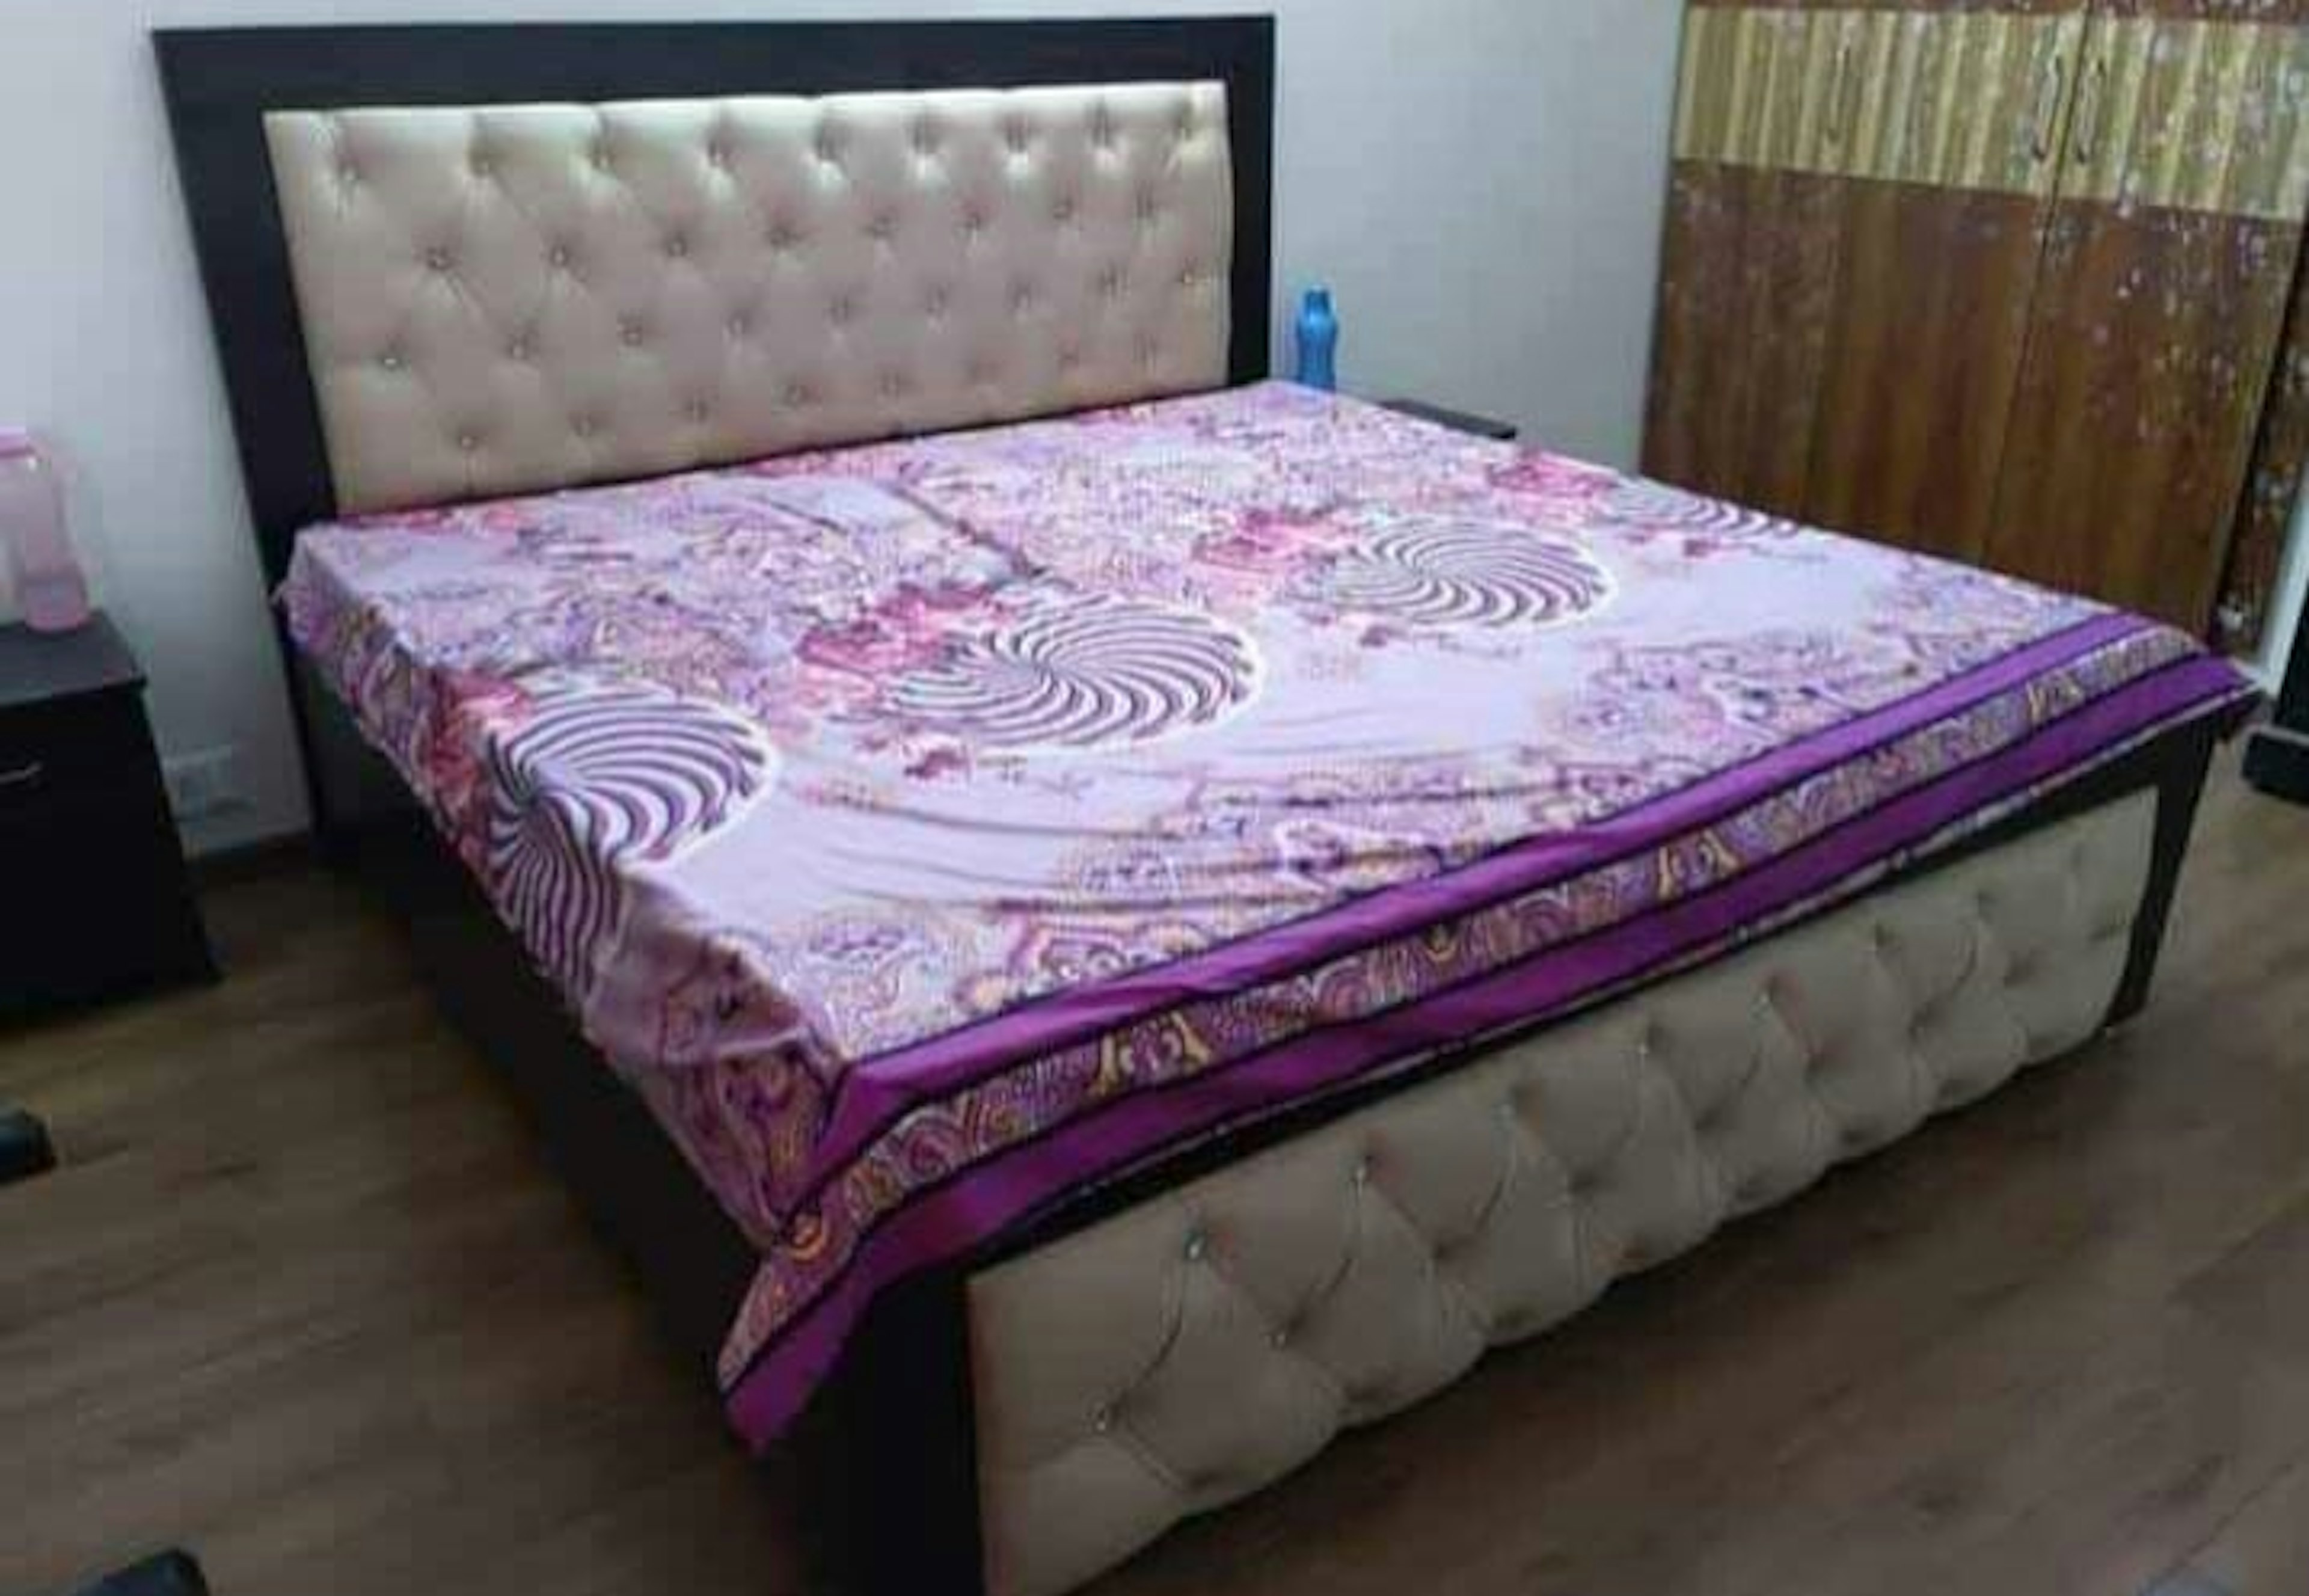 View - Double bed with mattress photos, Double bed with mattress available in Pune, make deal in 10000